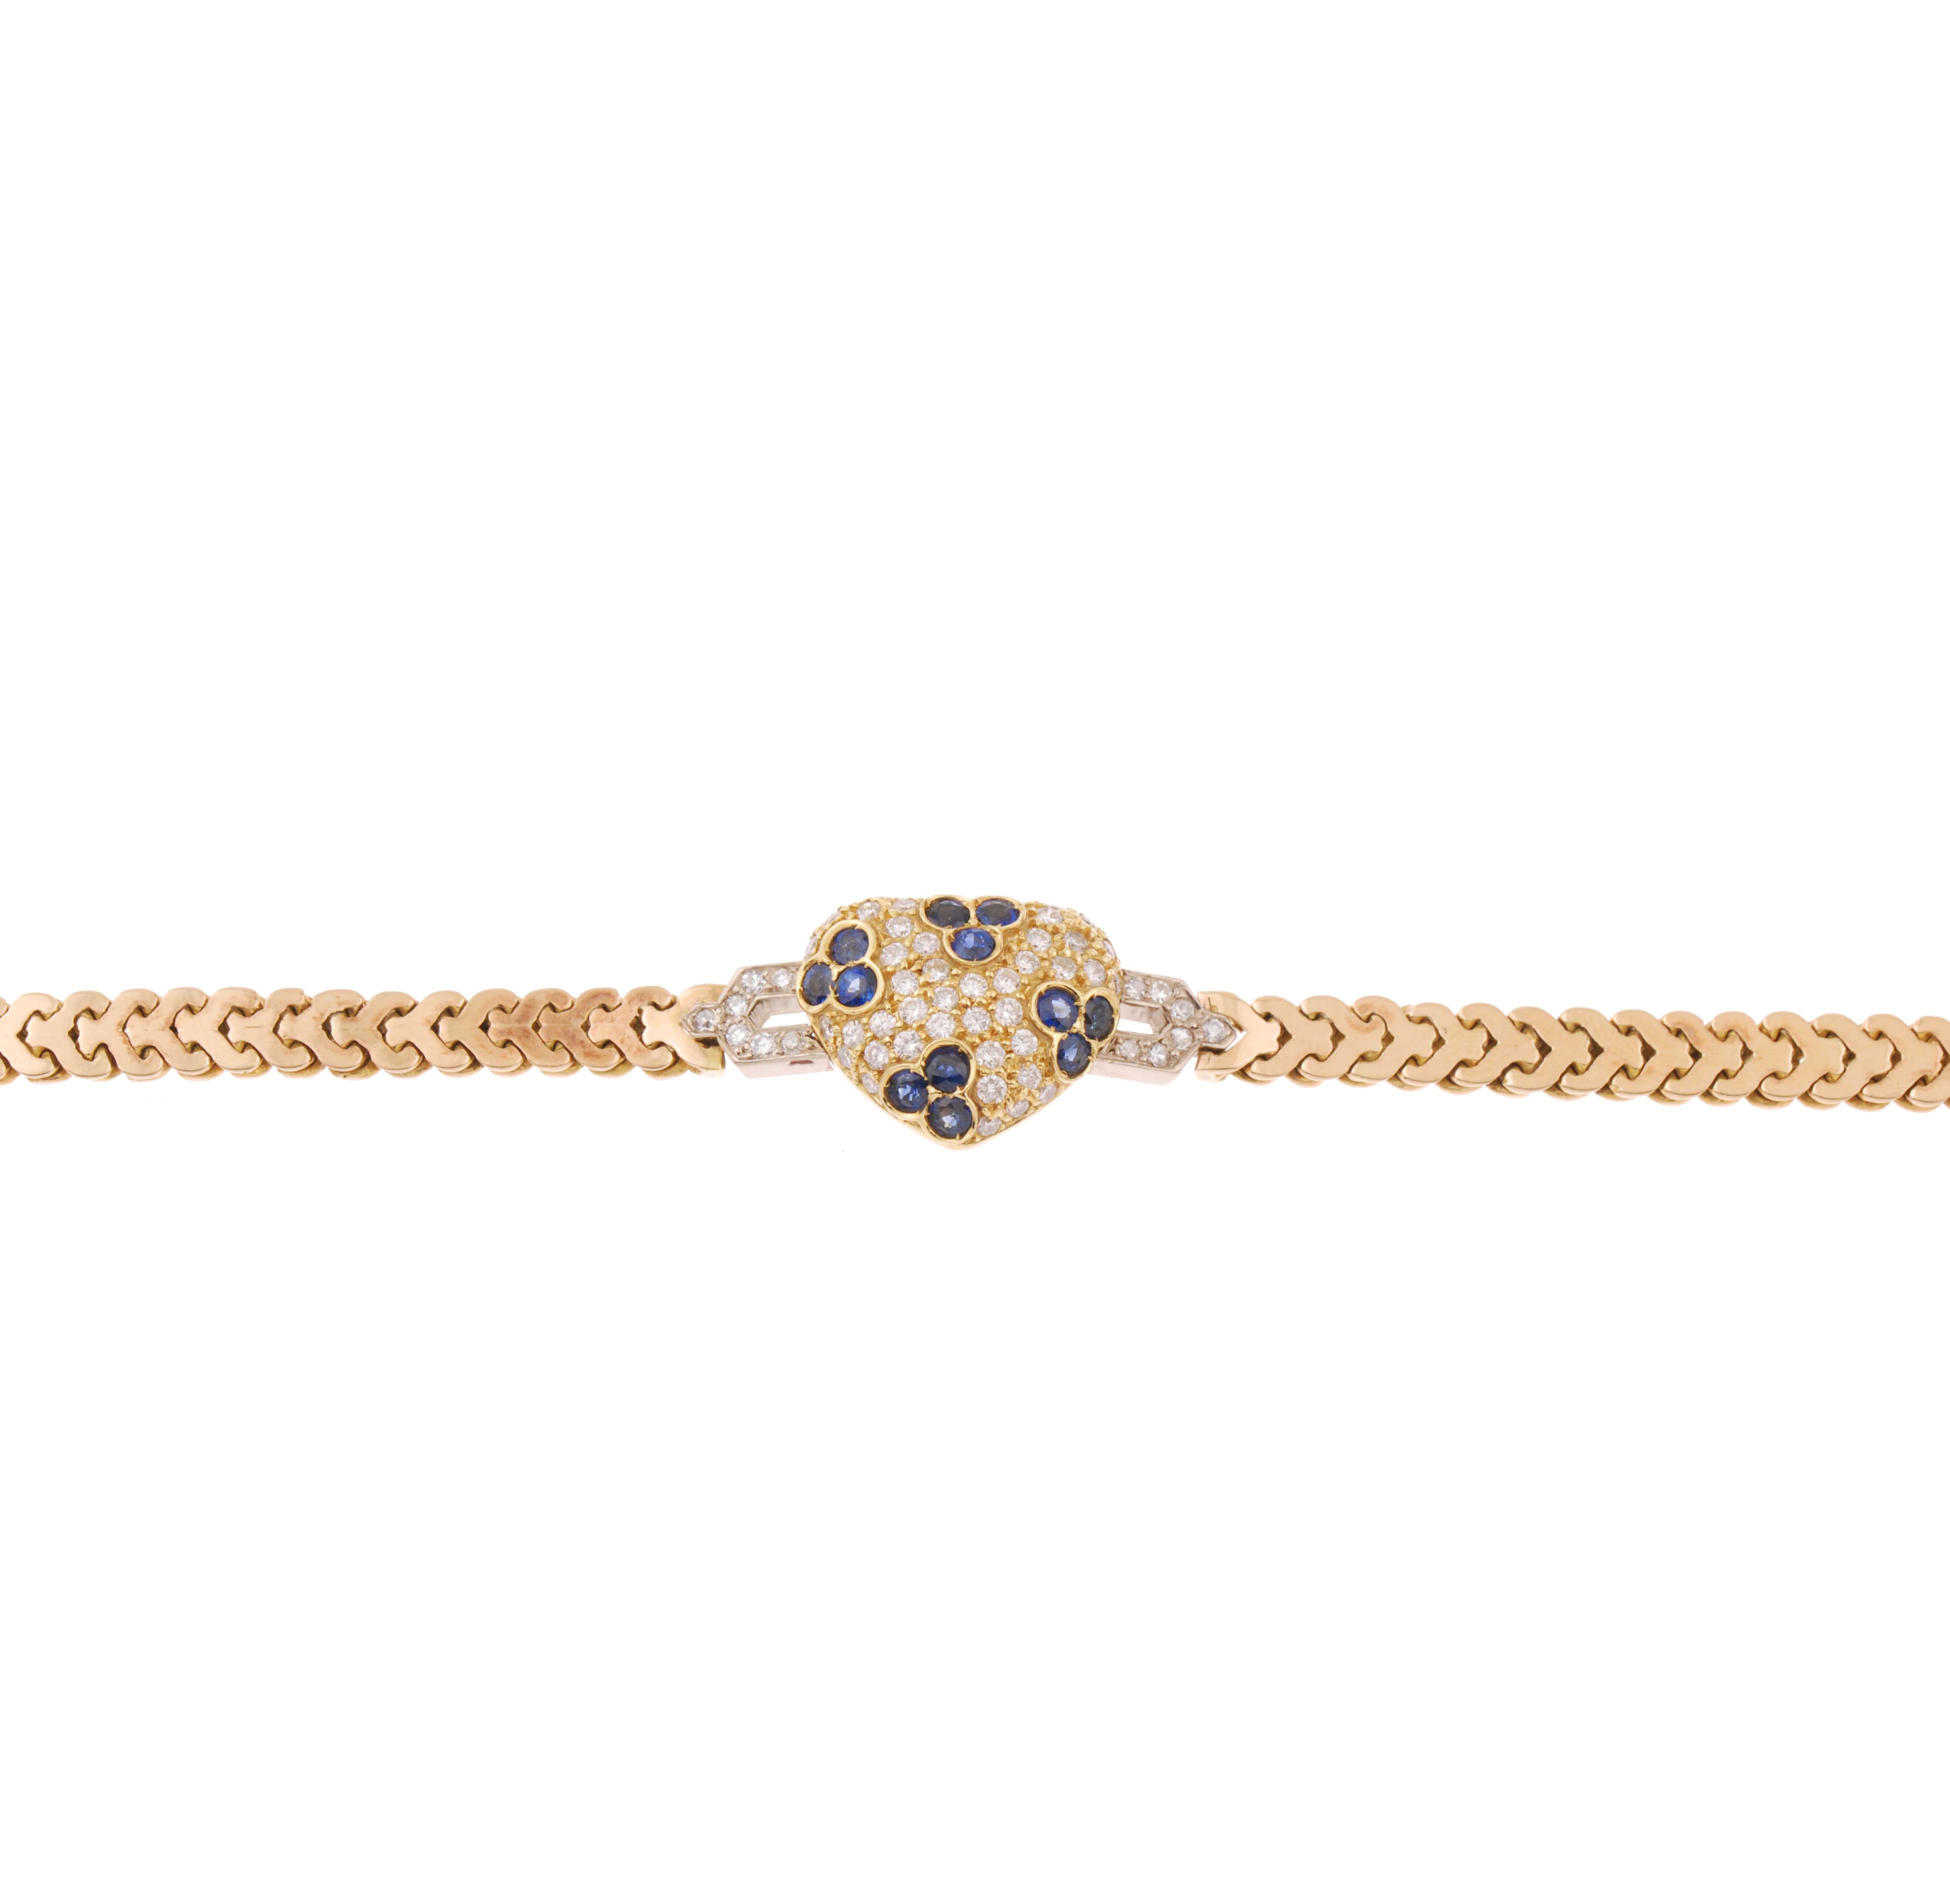 GOLD HEART BRACELET WITH DIAMONDS AND SAPPHIRES. 